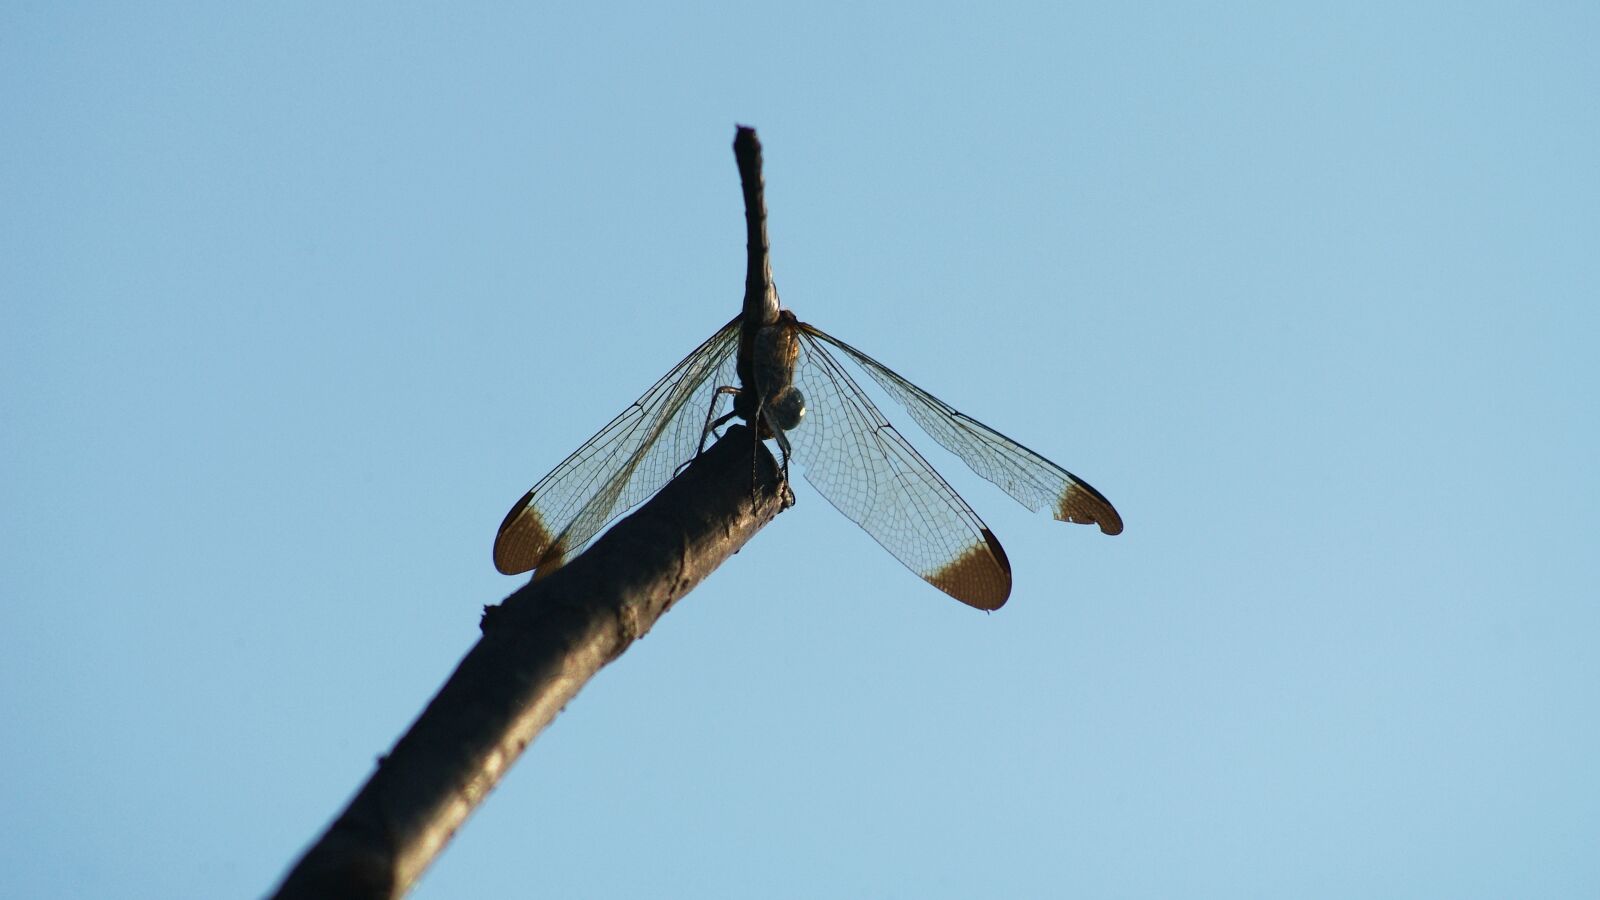 Fujifilm FinePix S3 Pro sample photo. Dragonfly, red dragonfly, autumn photography